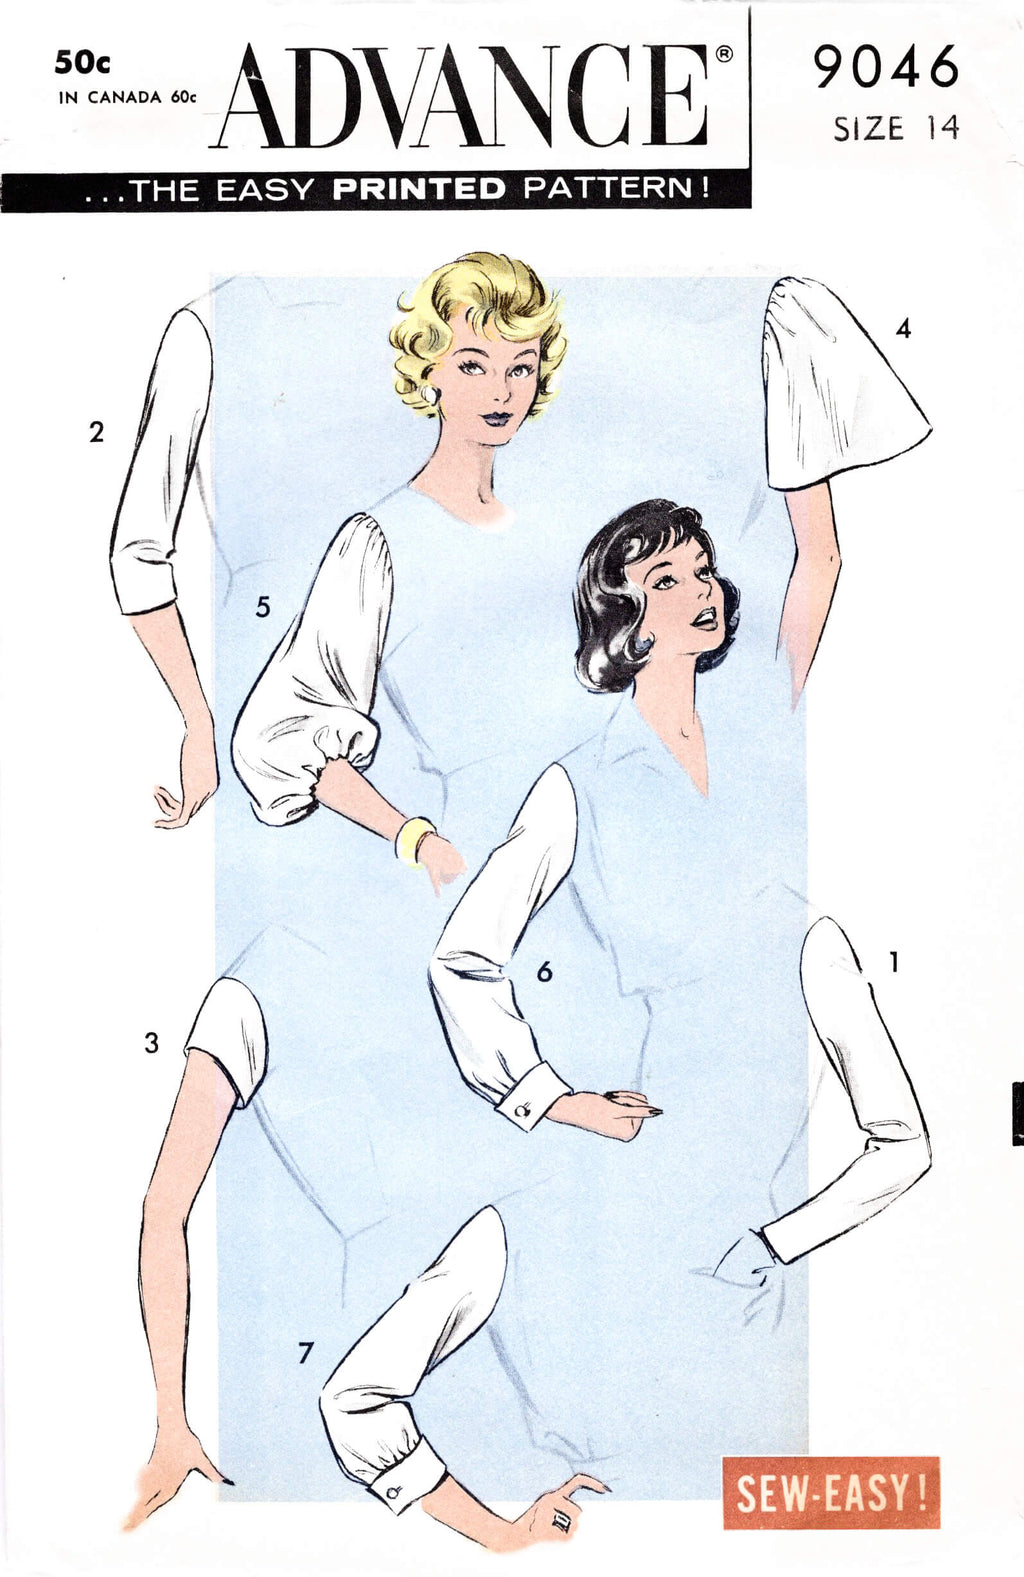 1950s 1959 set of sleeve vintage sewing pattern reproduction 7 styles bishop sleeve cape sleeve 3/4 length Advance 9046